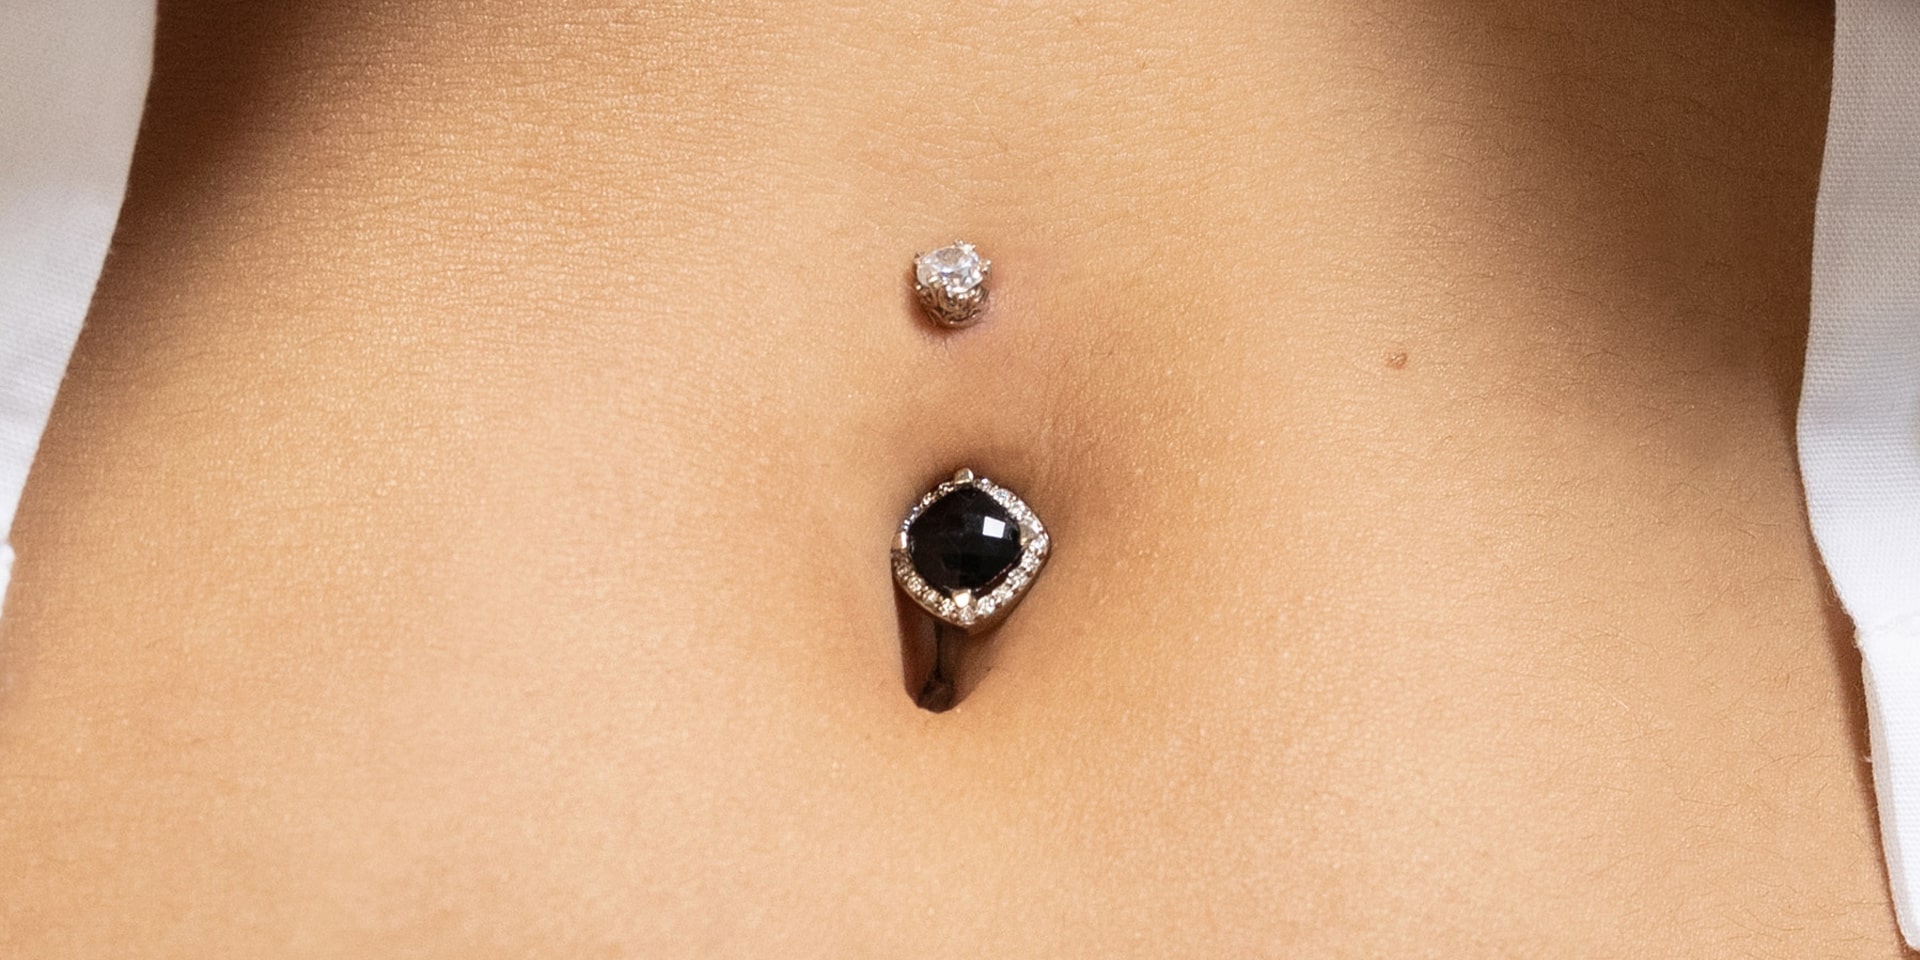 Close-up view of a cartilage piercing and a naval piercing